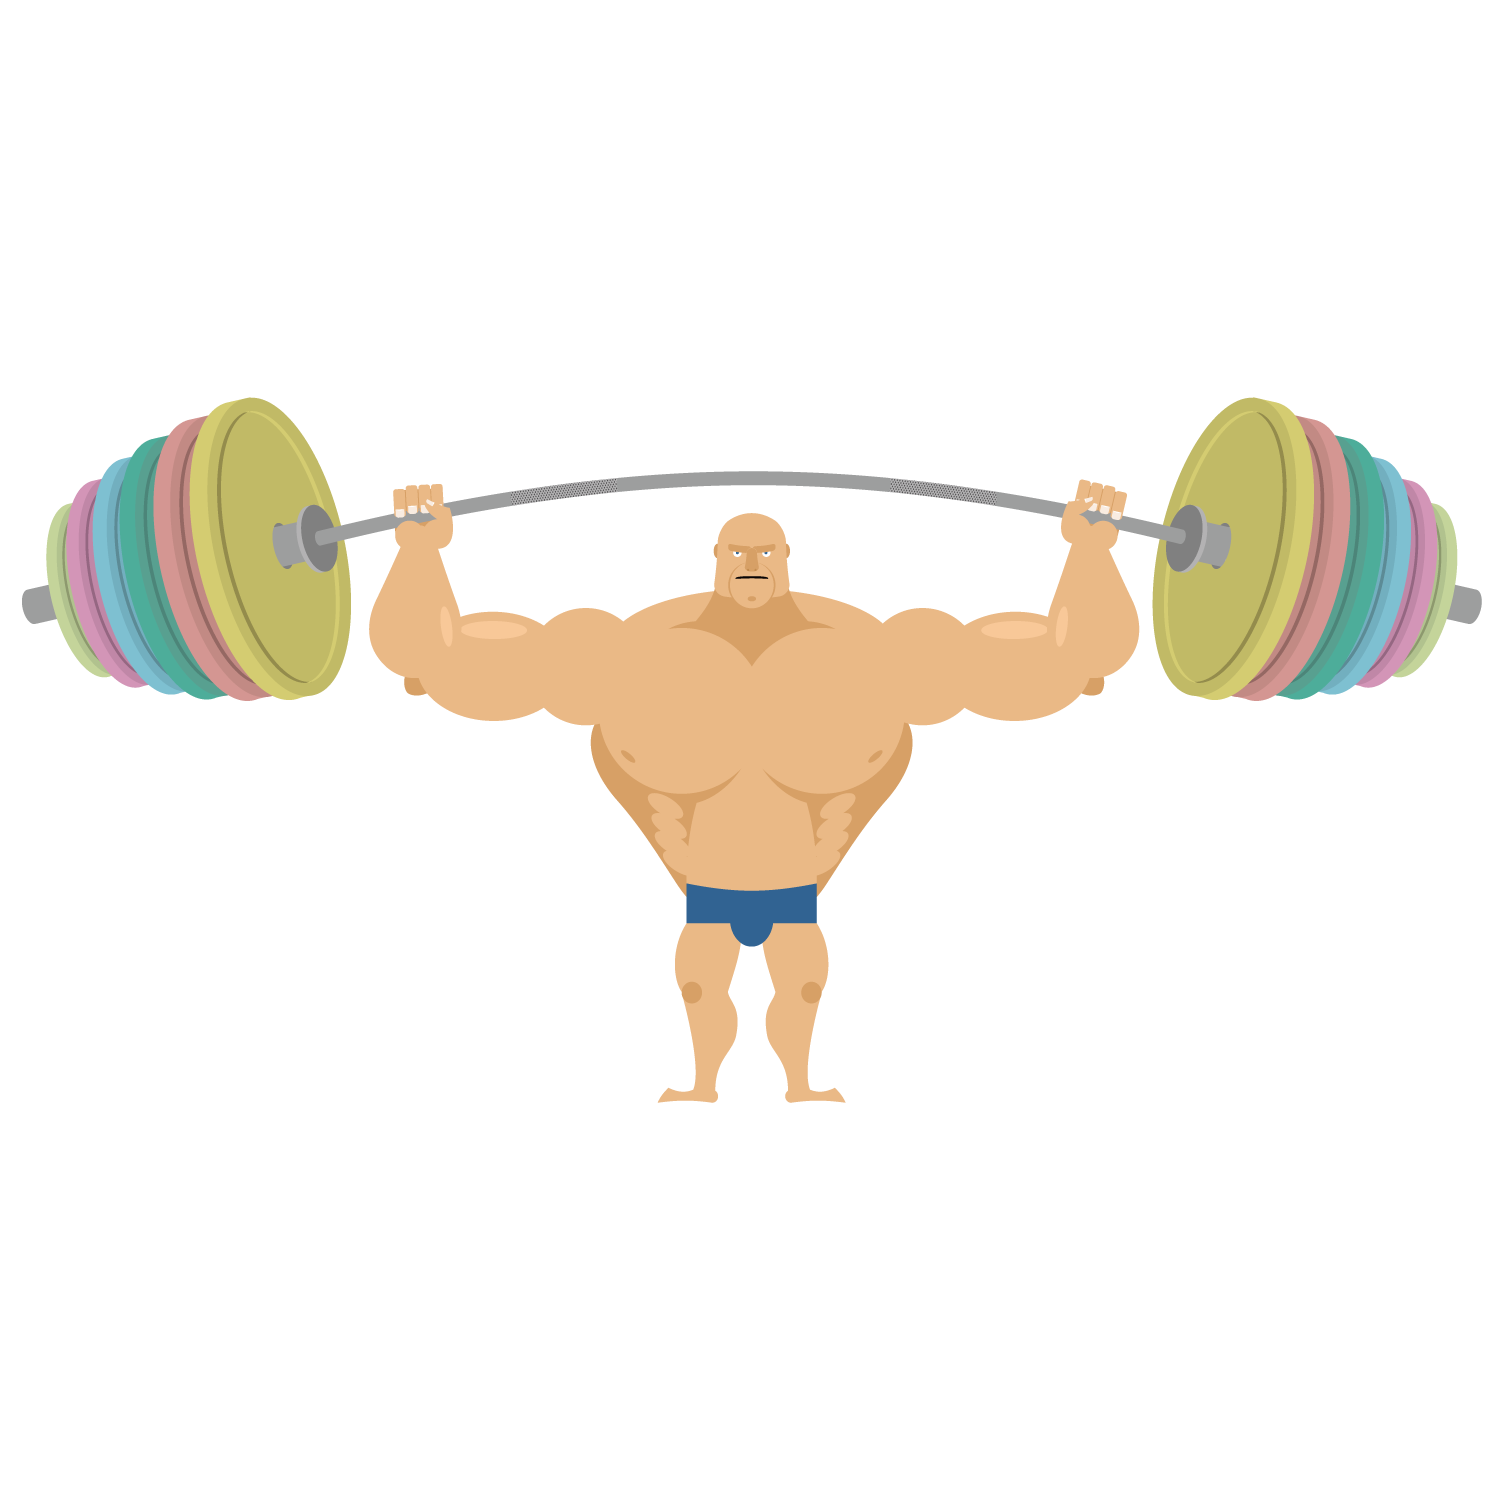 Barbell saint patricks day. Muscles clipart weightlifting